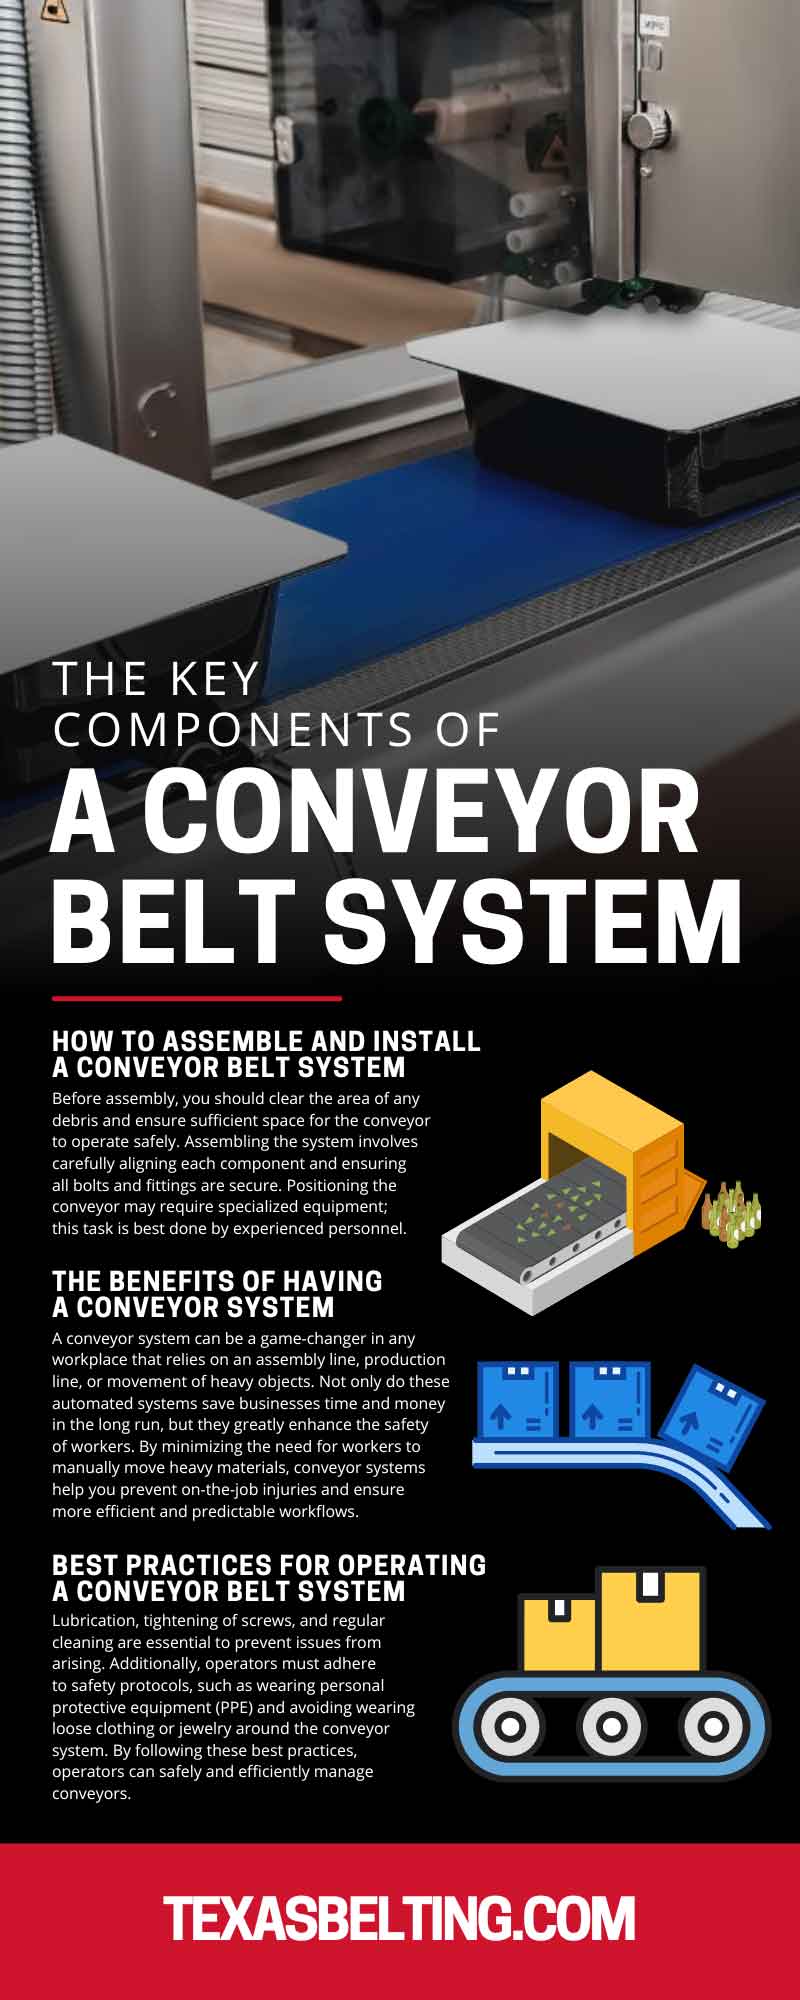 The Key Components of a Conveyor Belt System